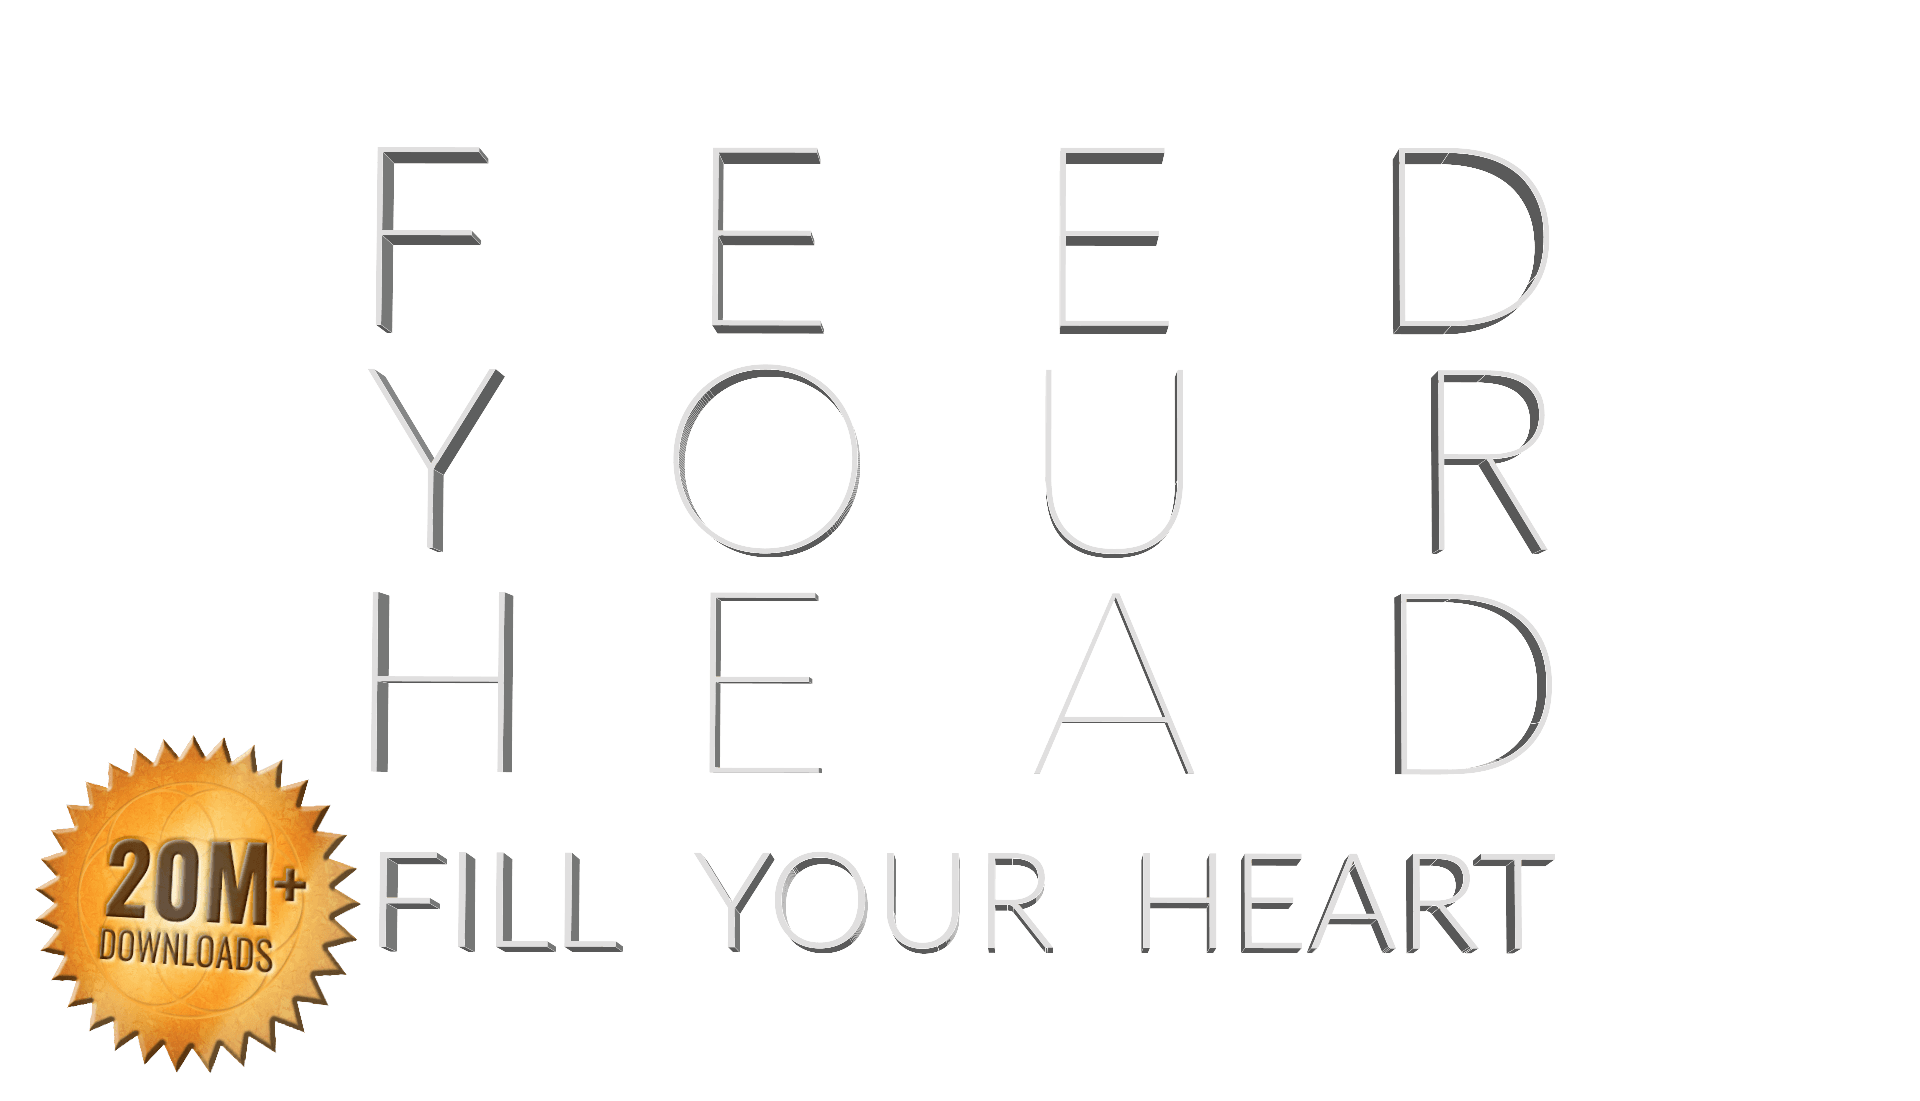 Feed your head, fill your heart